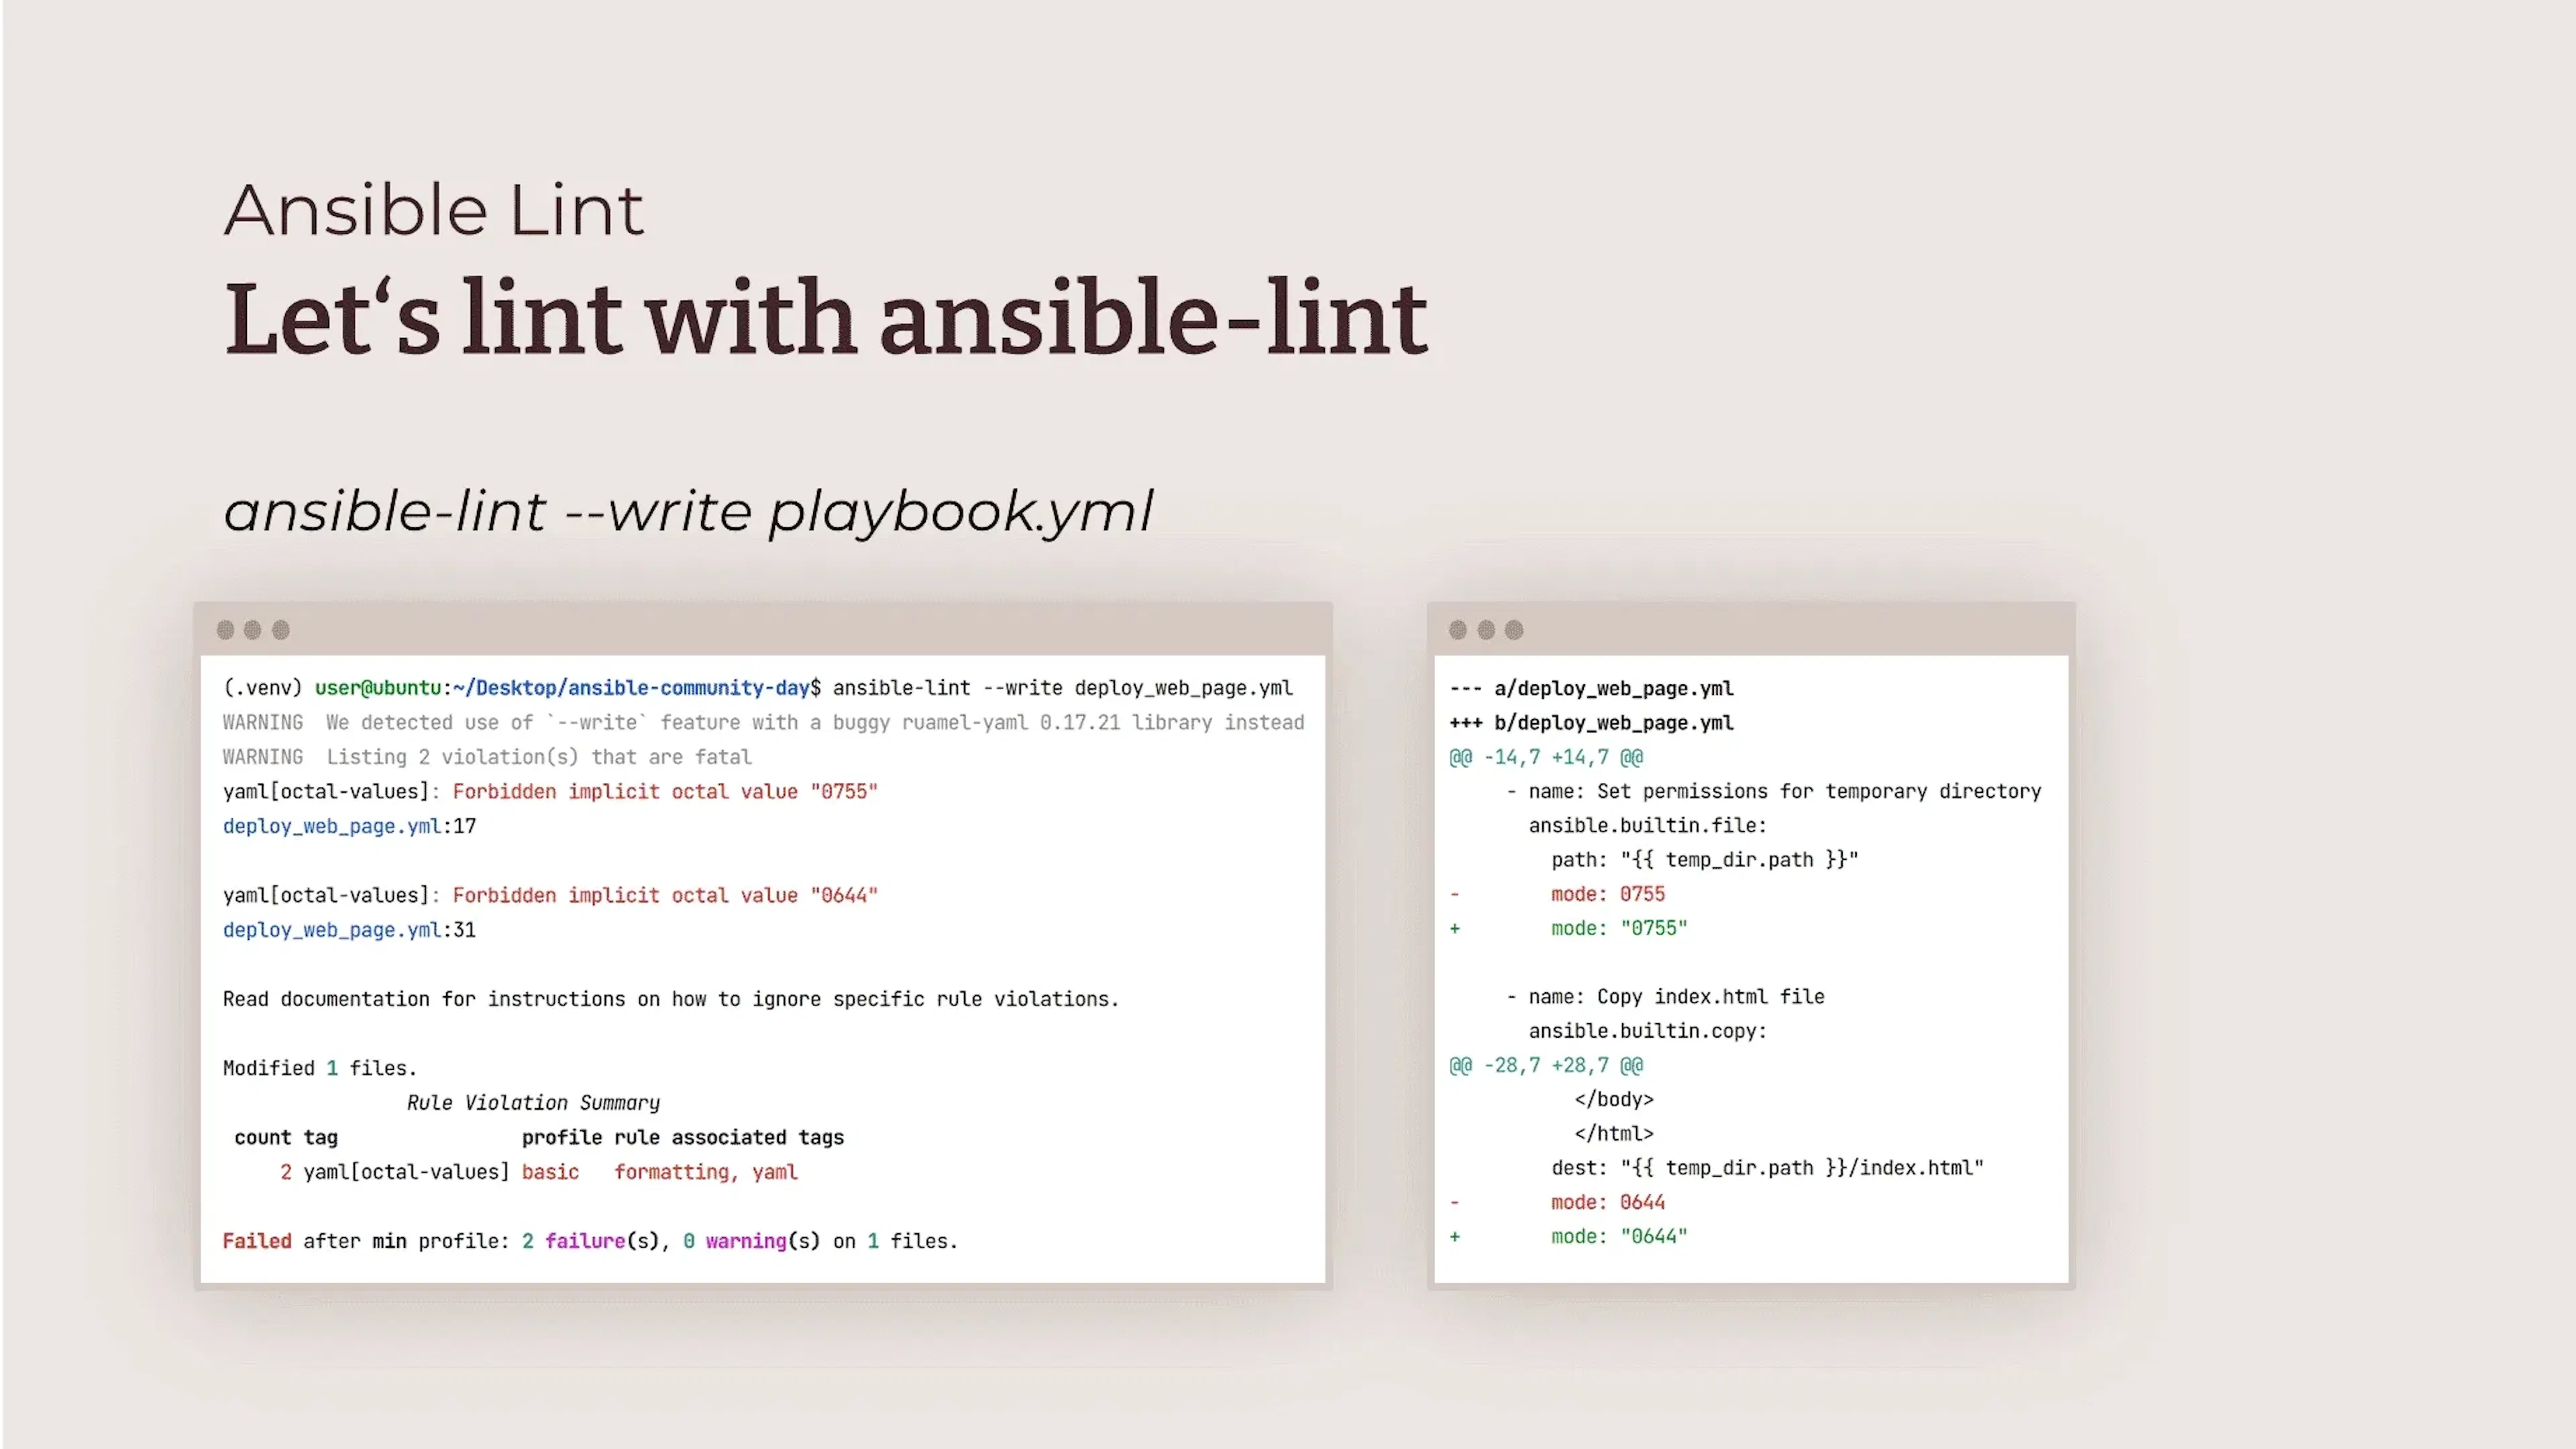 Leveraging Ansible Lint to perfect the playbook 